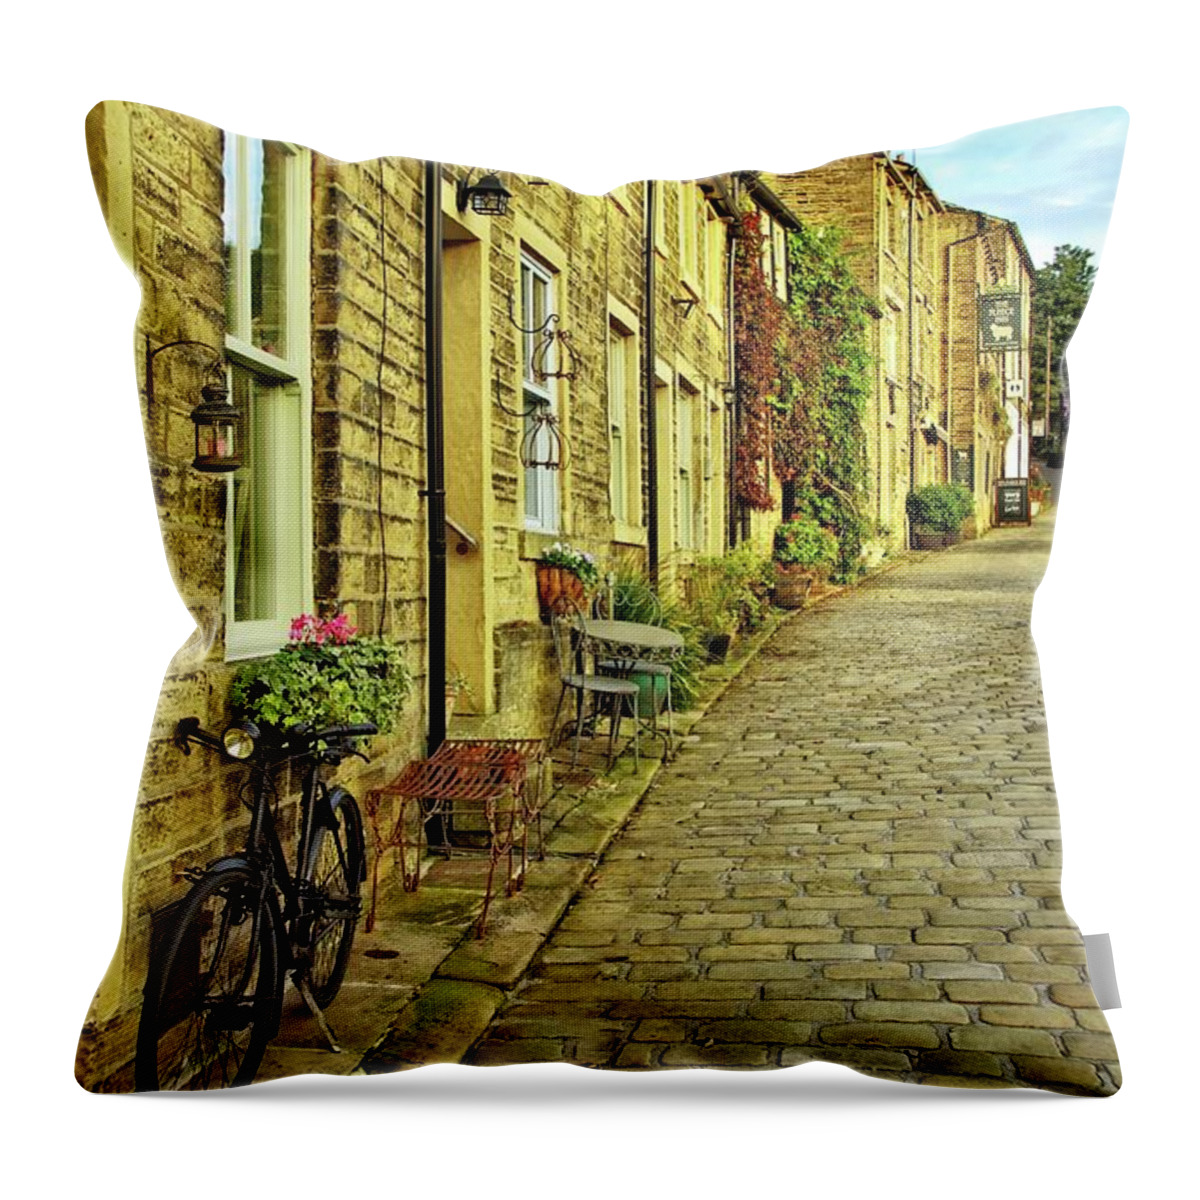 Howarth Throw Pillow featuring the photograph Howarth, West Yorkshire. by David Birchall